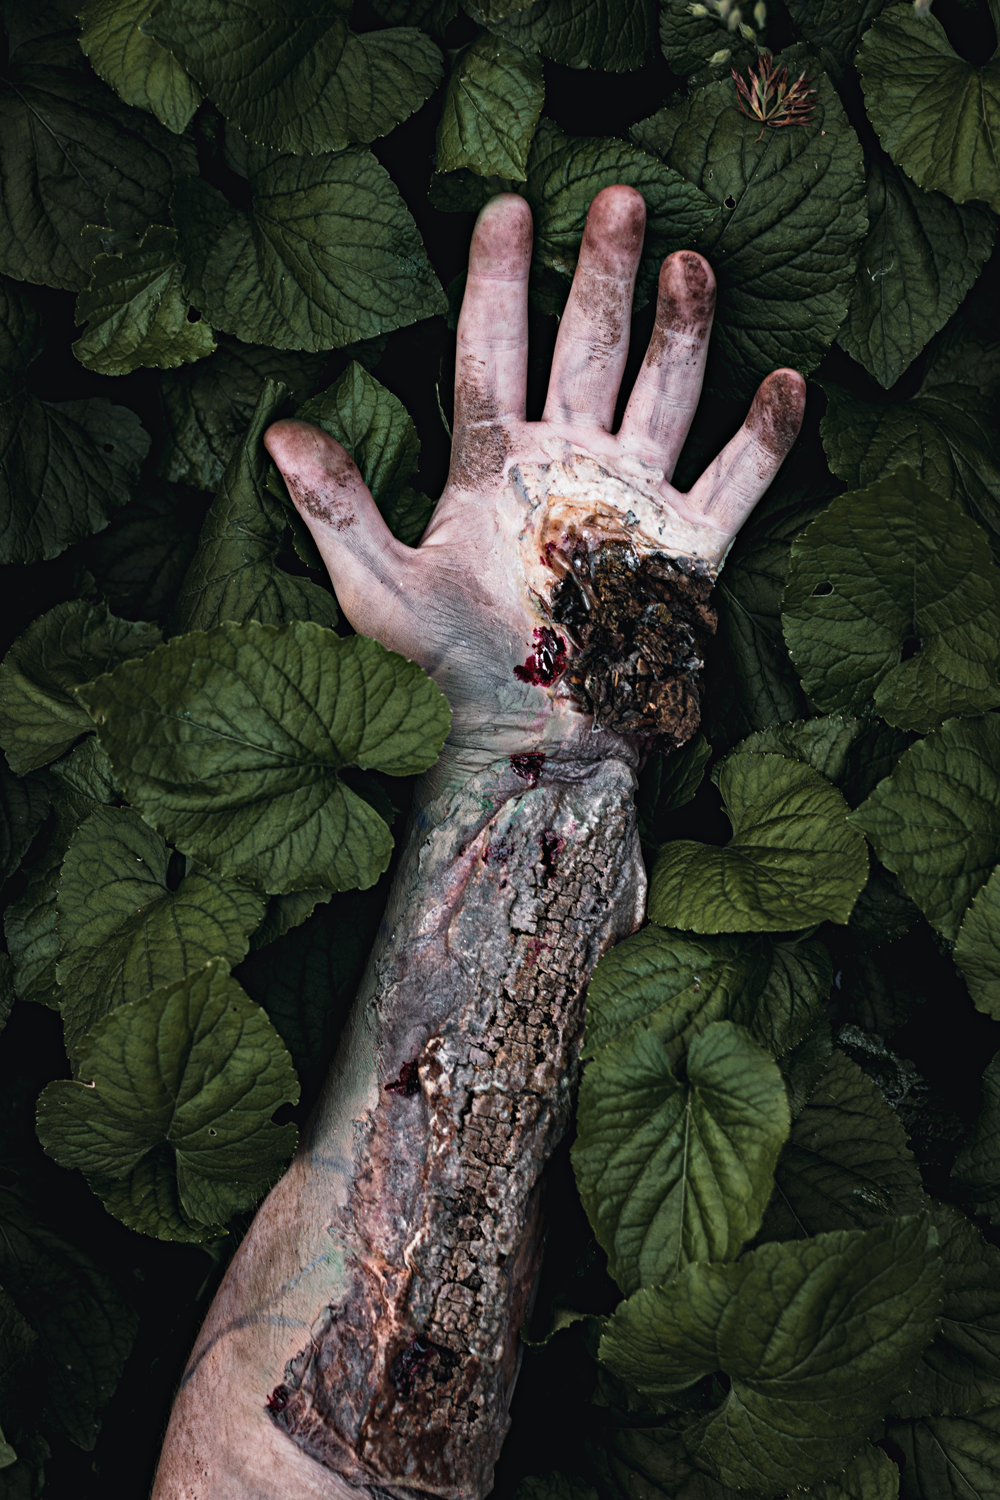 Colour photograph of a tattooed arm covered in dirt and bark with leaves in hand.